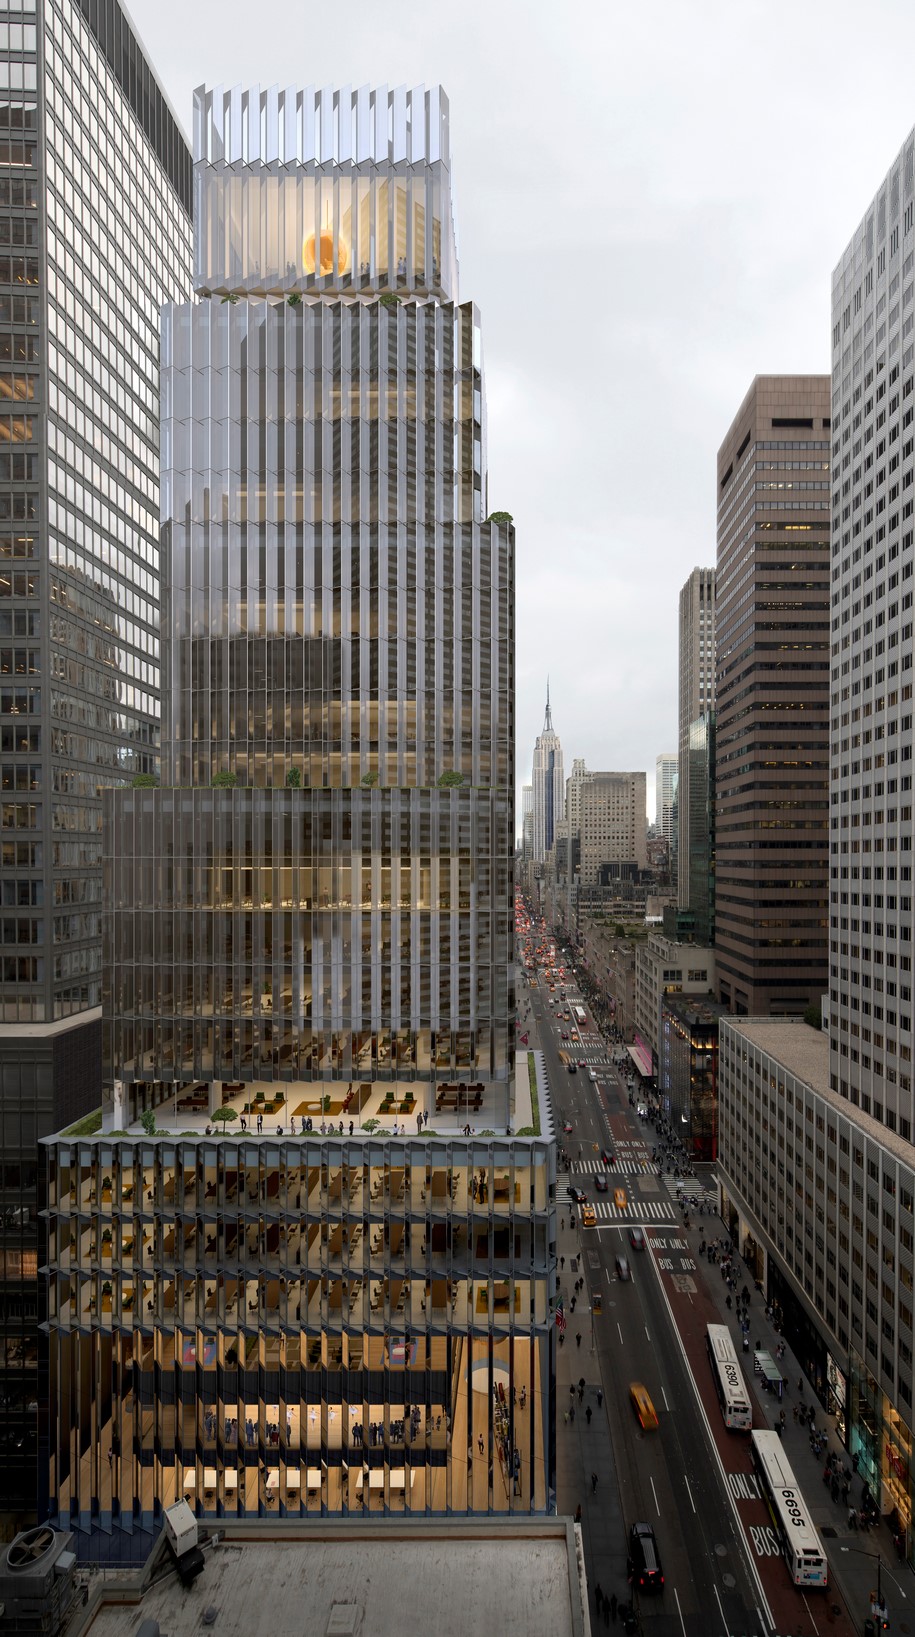 Archisearch David Chipperfield Architects to build Rolex USA headquarters